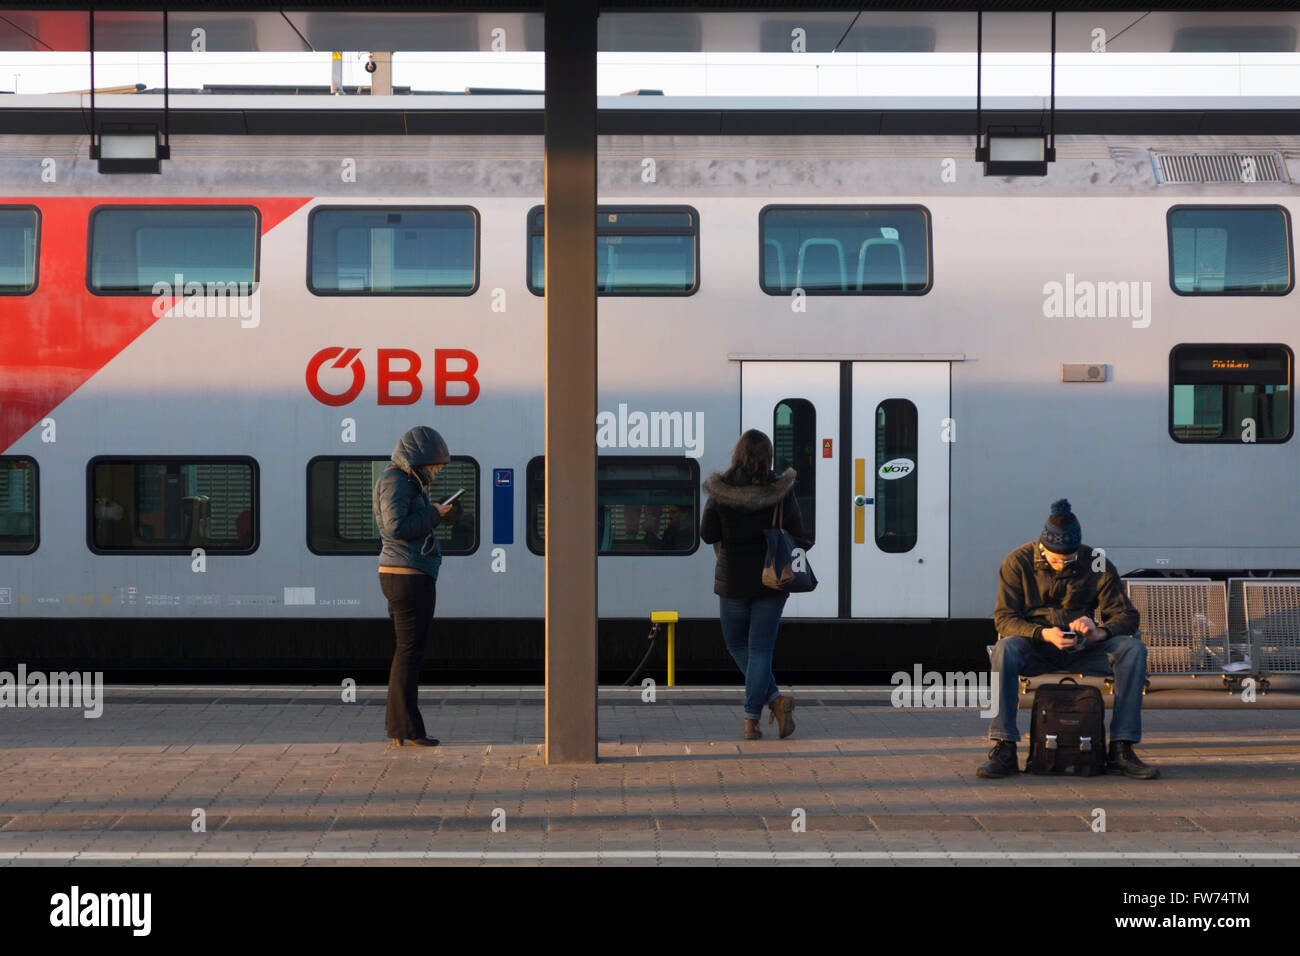 A view of a train and waiting passengers at sunset at Sankt Pölten train station in Austria Stock Photo